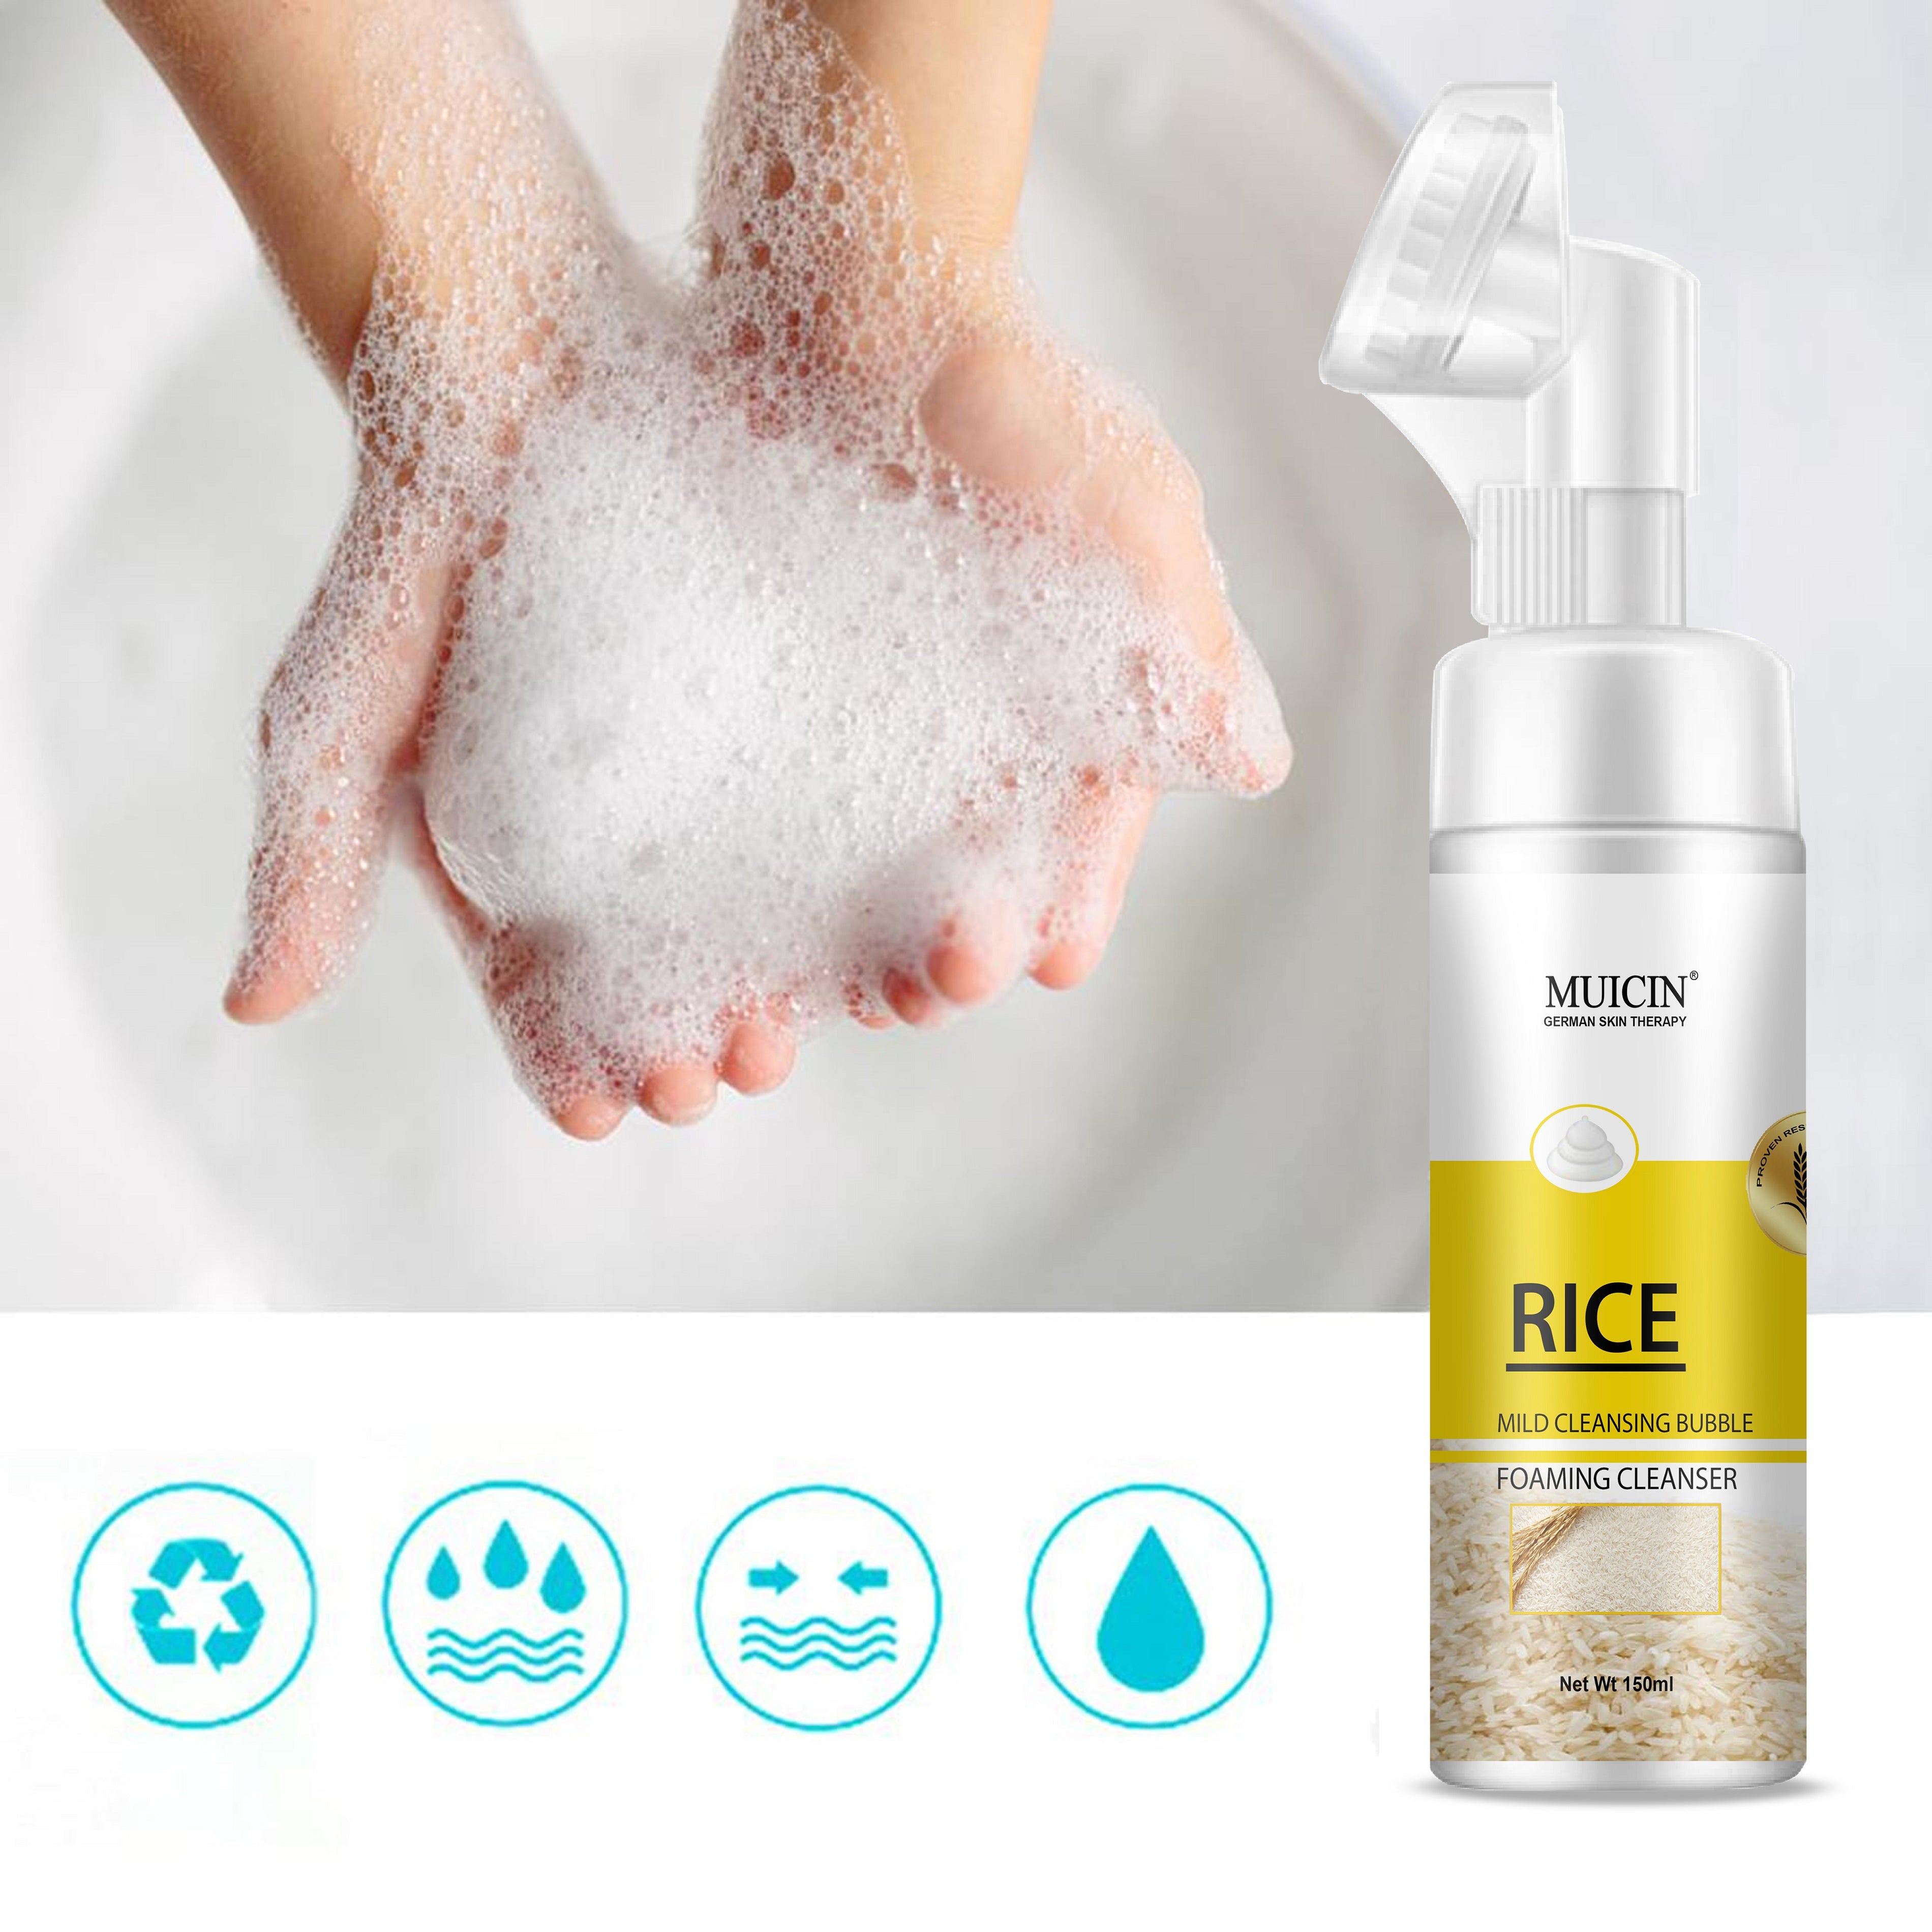 RICE MILD CLEANSING BUBBLE FOAMING FACIAL CLEANSER - DELICATE PURITY